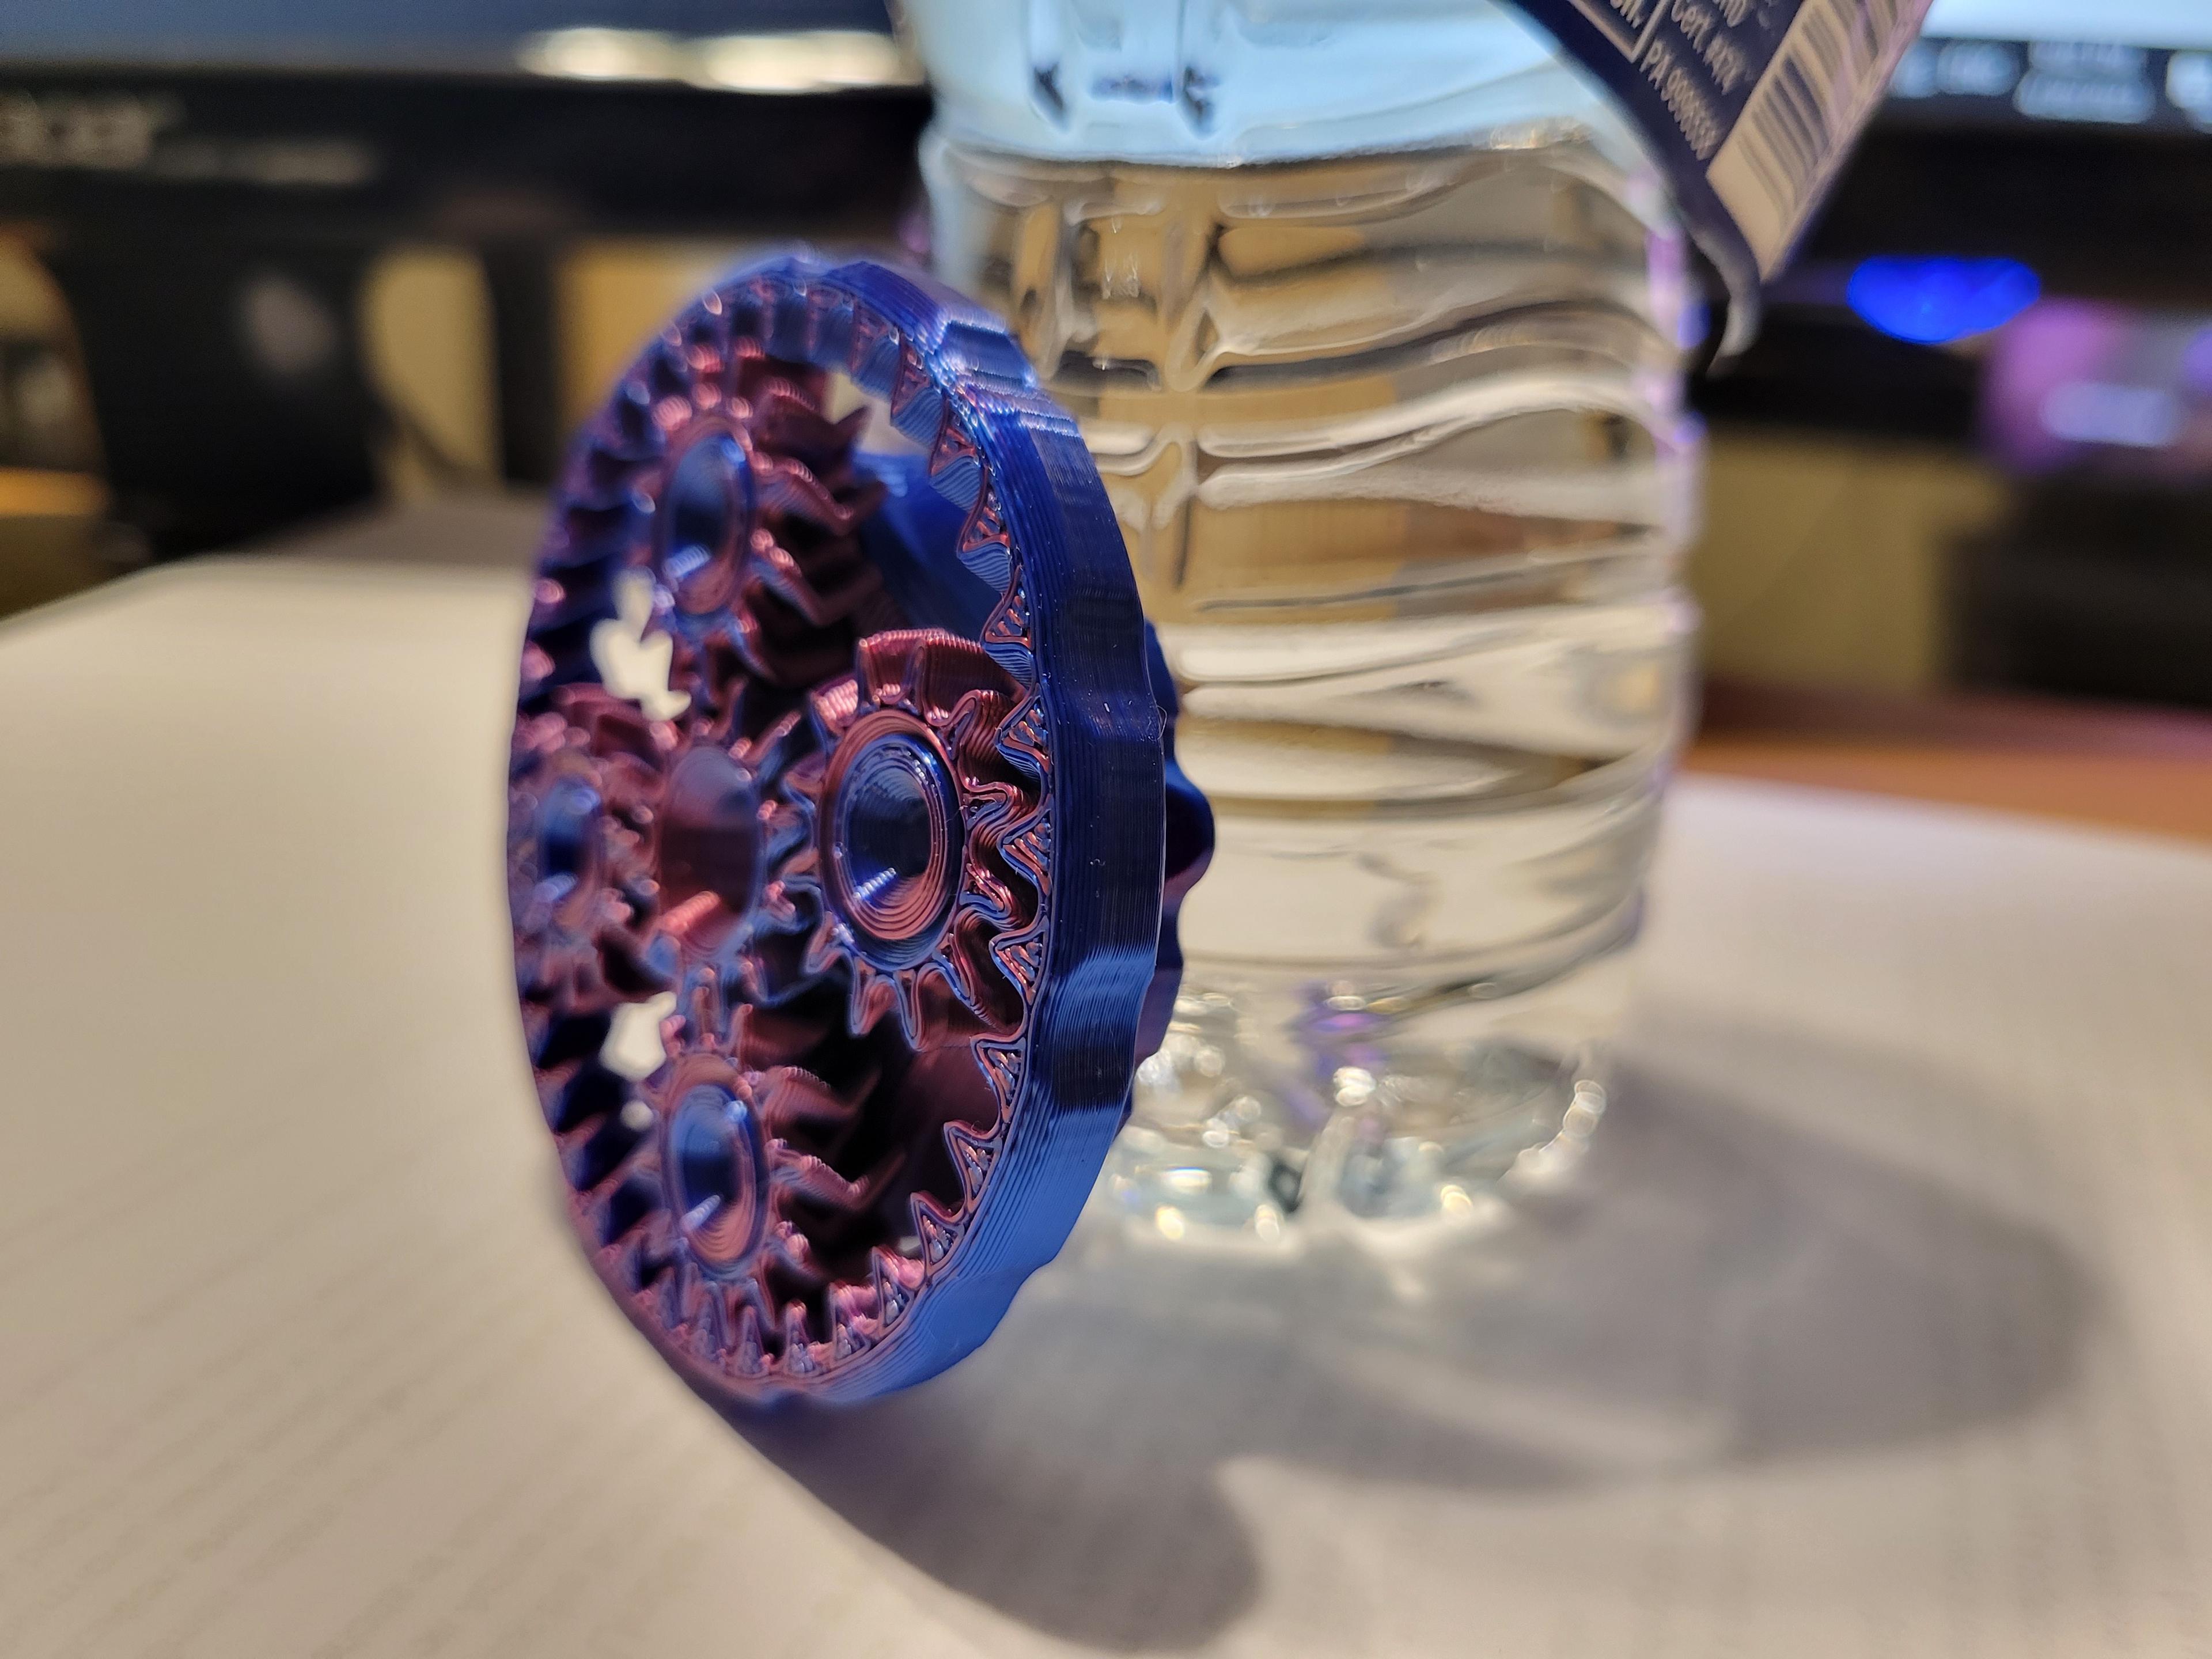 Mini Planetary Gear Print-in-Place Demo - Prusa MK3S+ 2 hr 59 m, 0.2 layer height, 0.4 nozzle - 3d model